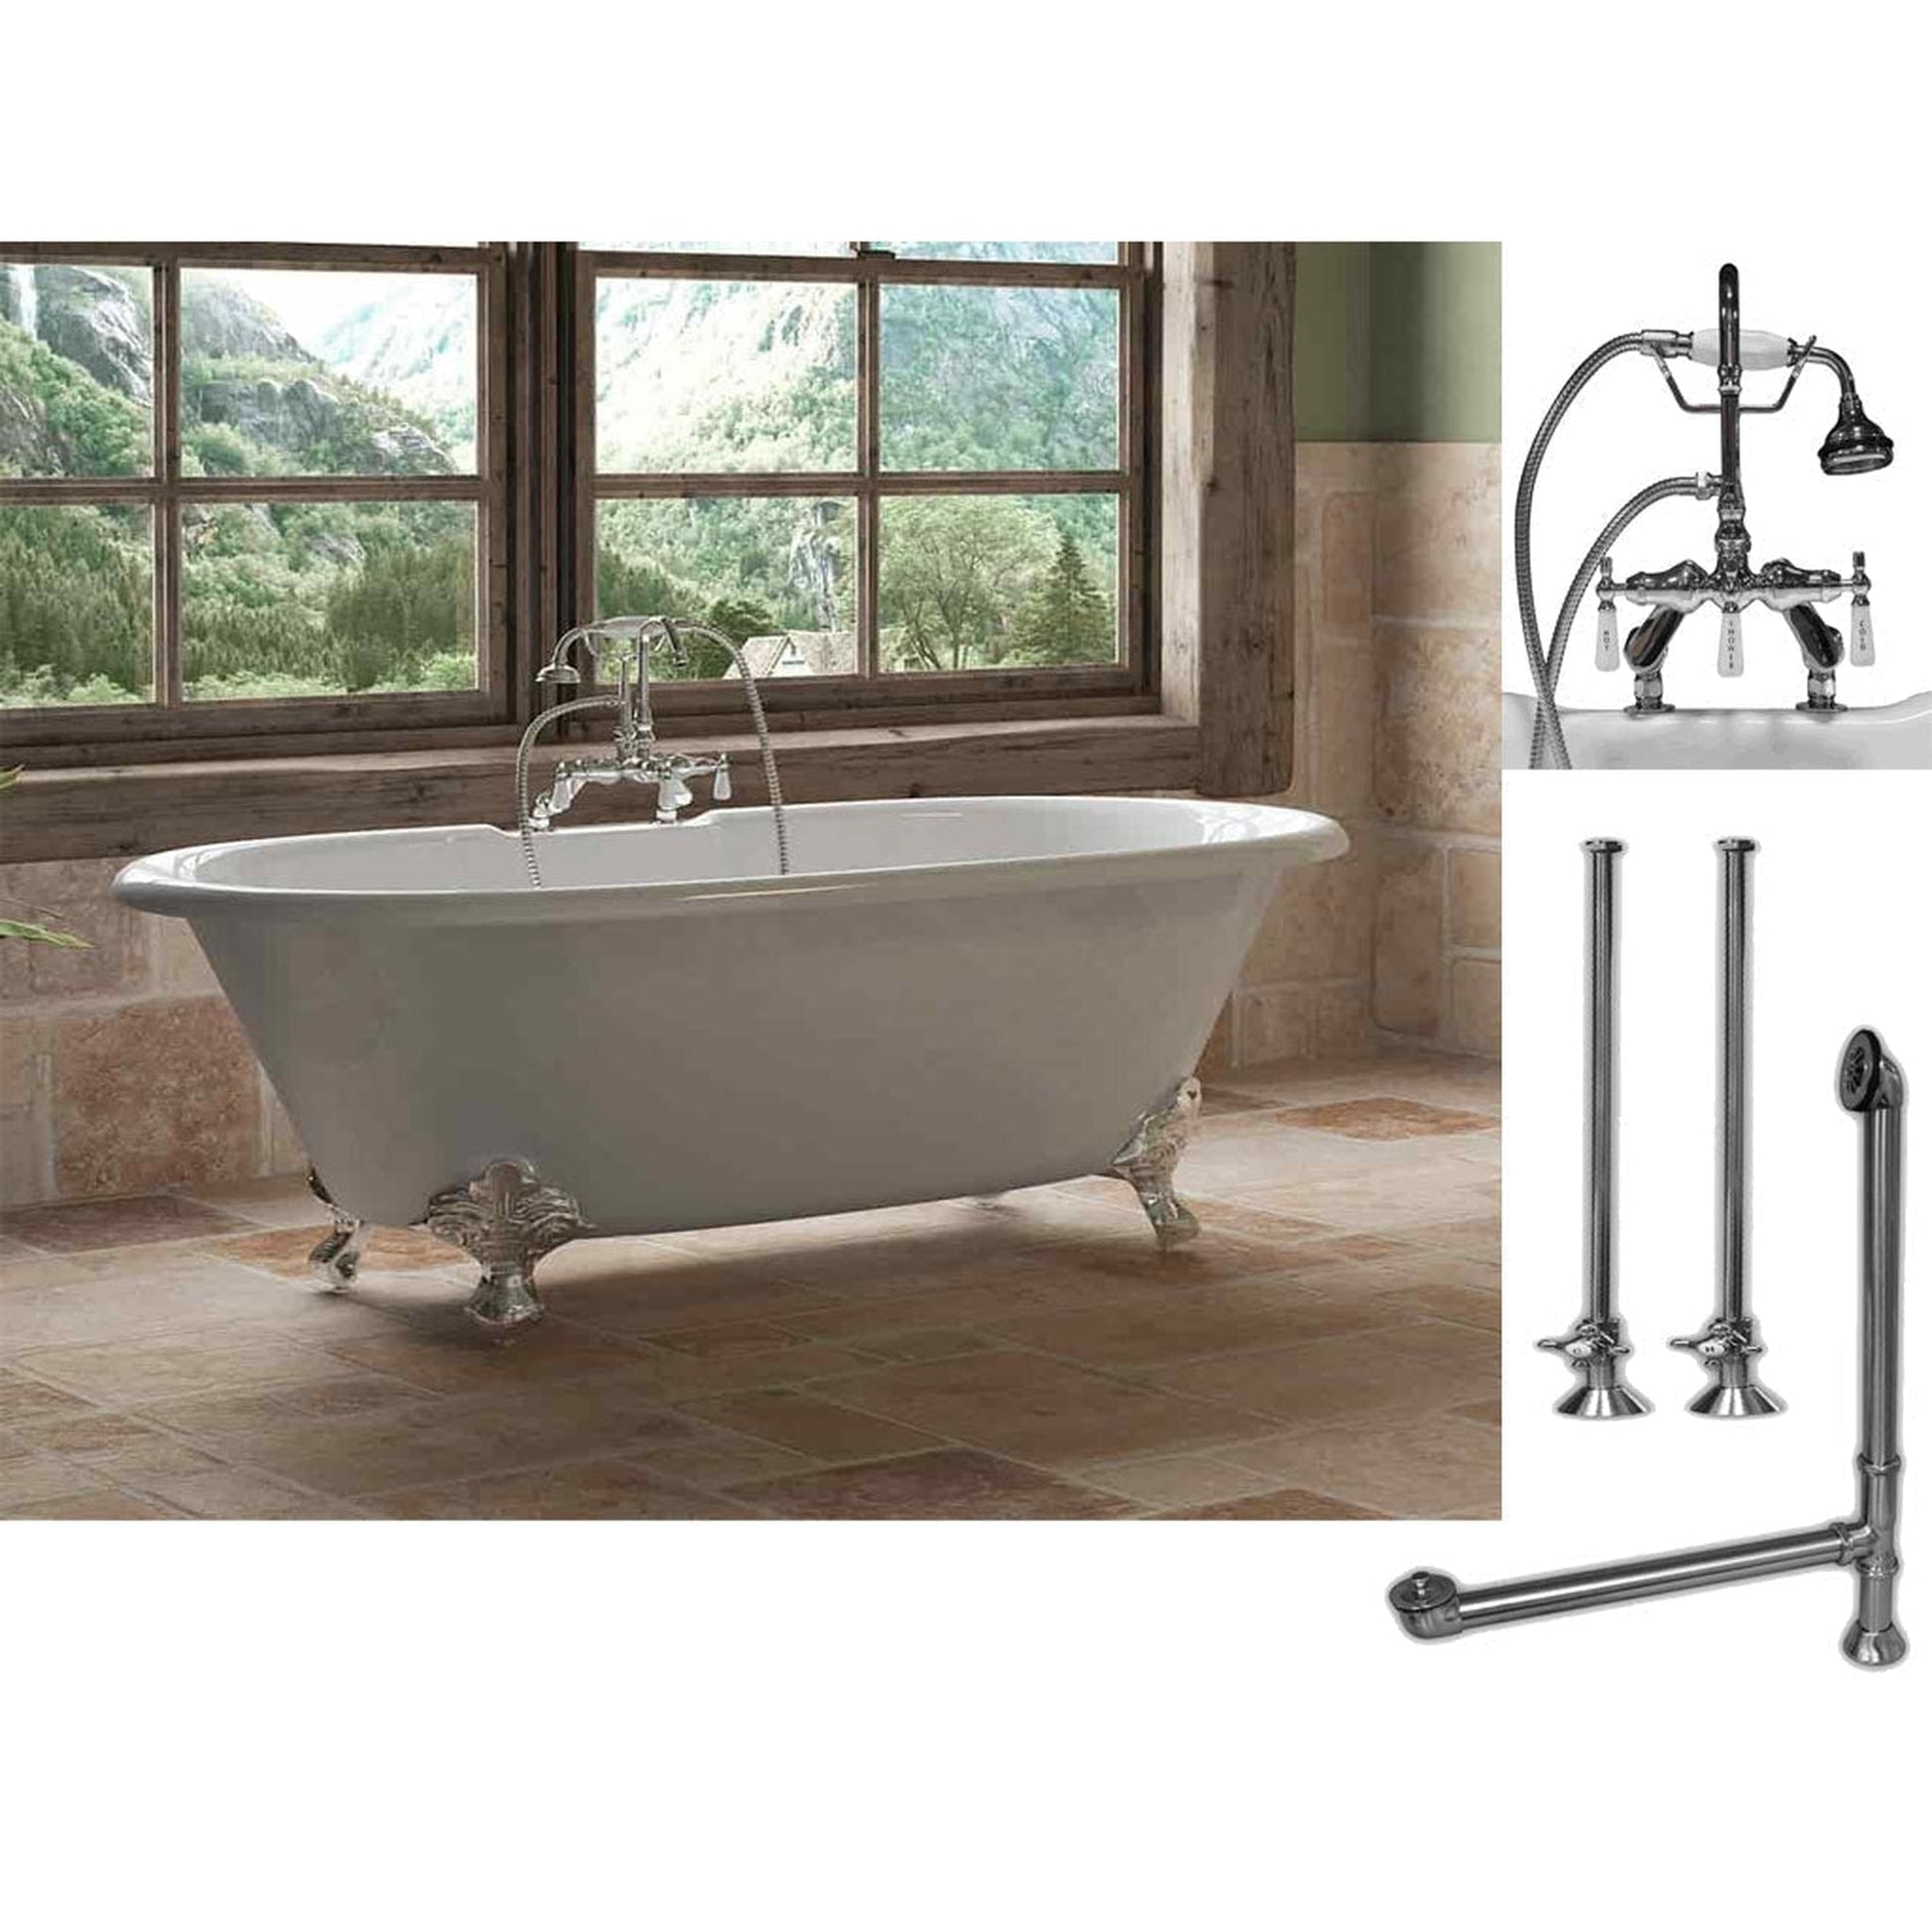 Cambridge Plumbing 60" White Cast Iron Double Ended Clawfoot Bathtub With Deck Holes And Complete Plumbing Package Including Porcelain Lever English Telephone Brass Faucet, Supply Lines, Drain And Overflow Assembly In Polished Chrome